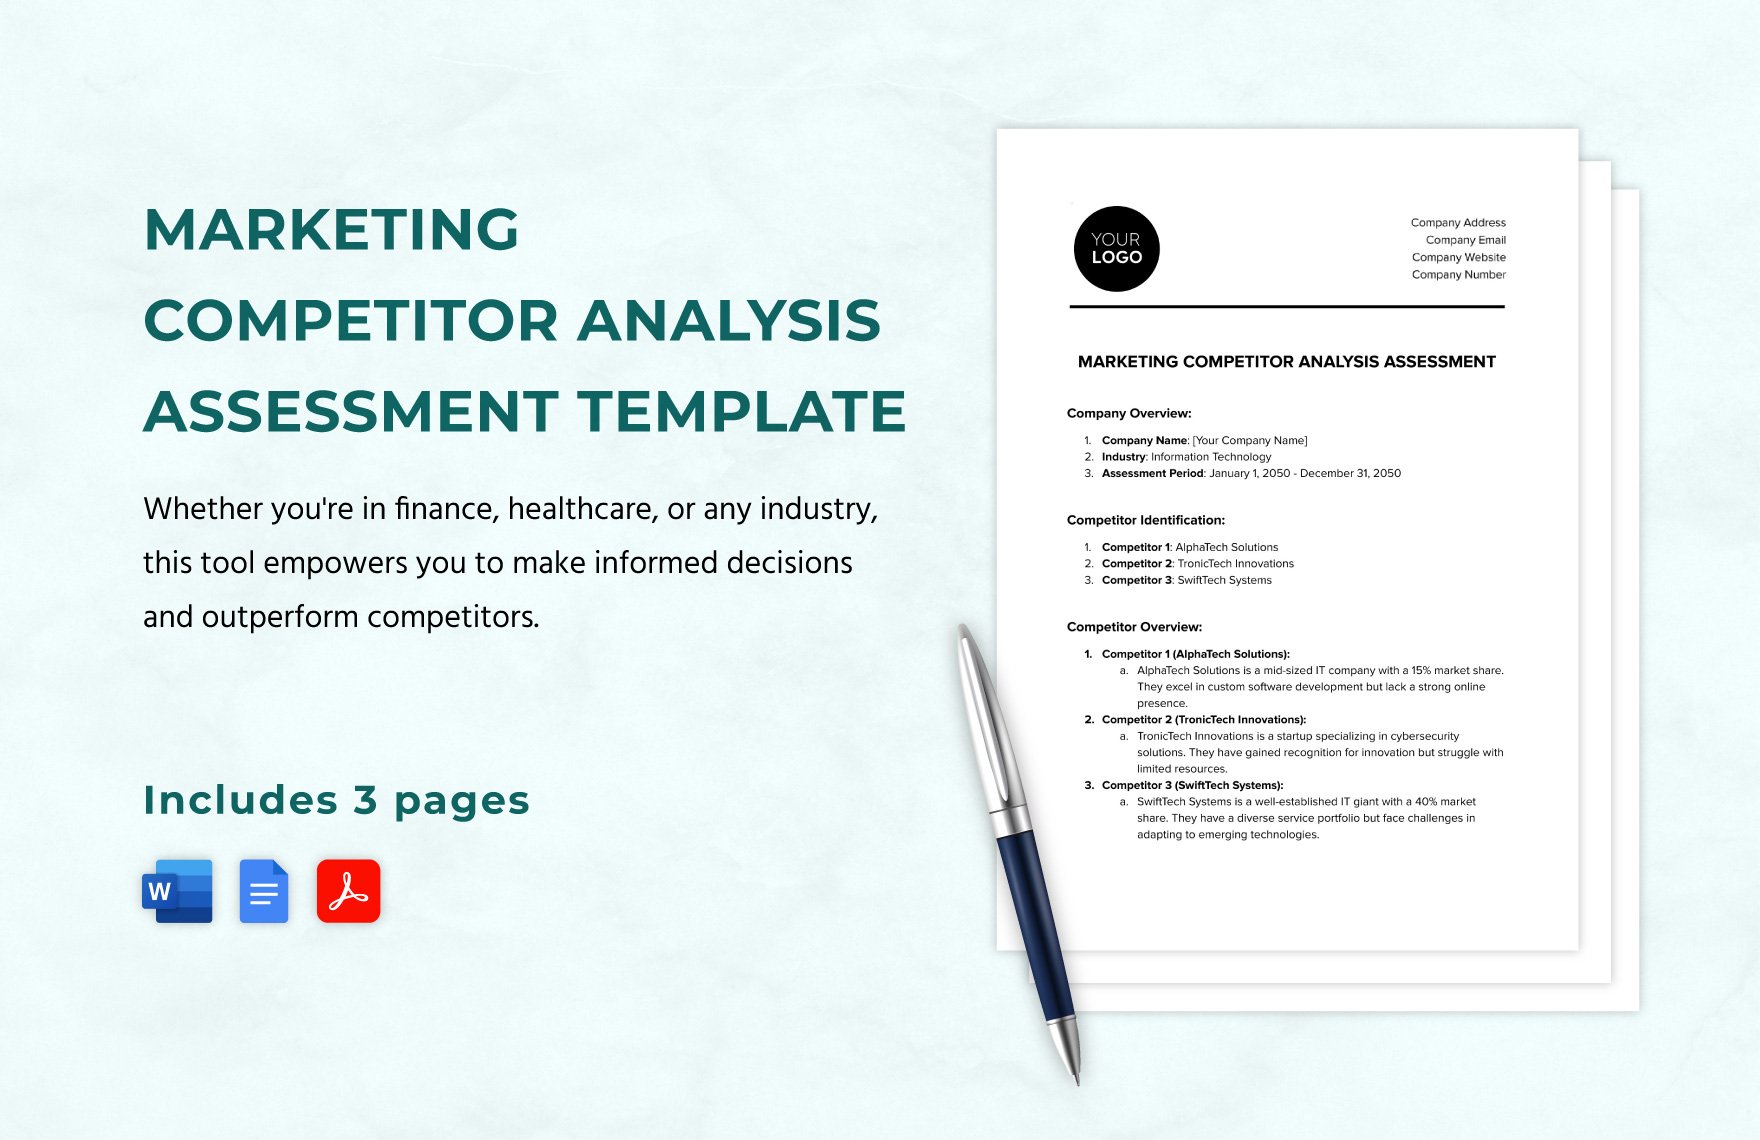 Marketing Competitor Analysis Assessment Template in Word, Google Docs, PDF